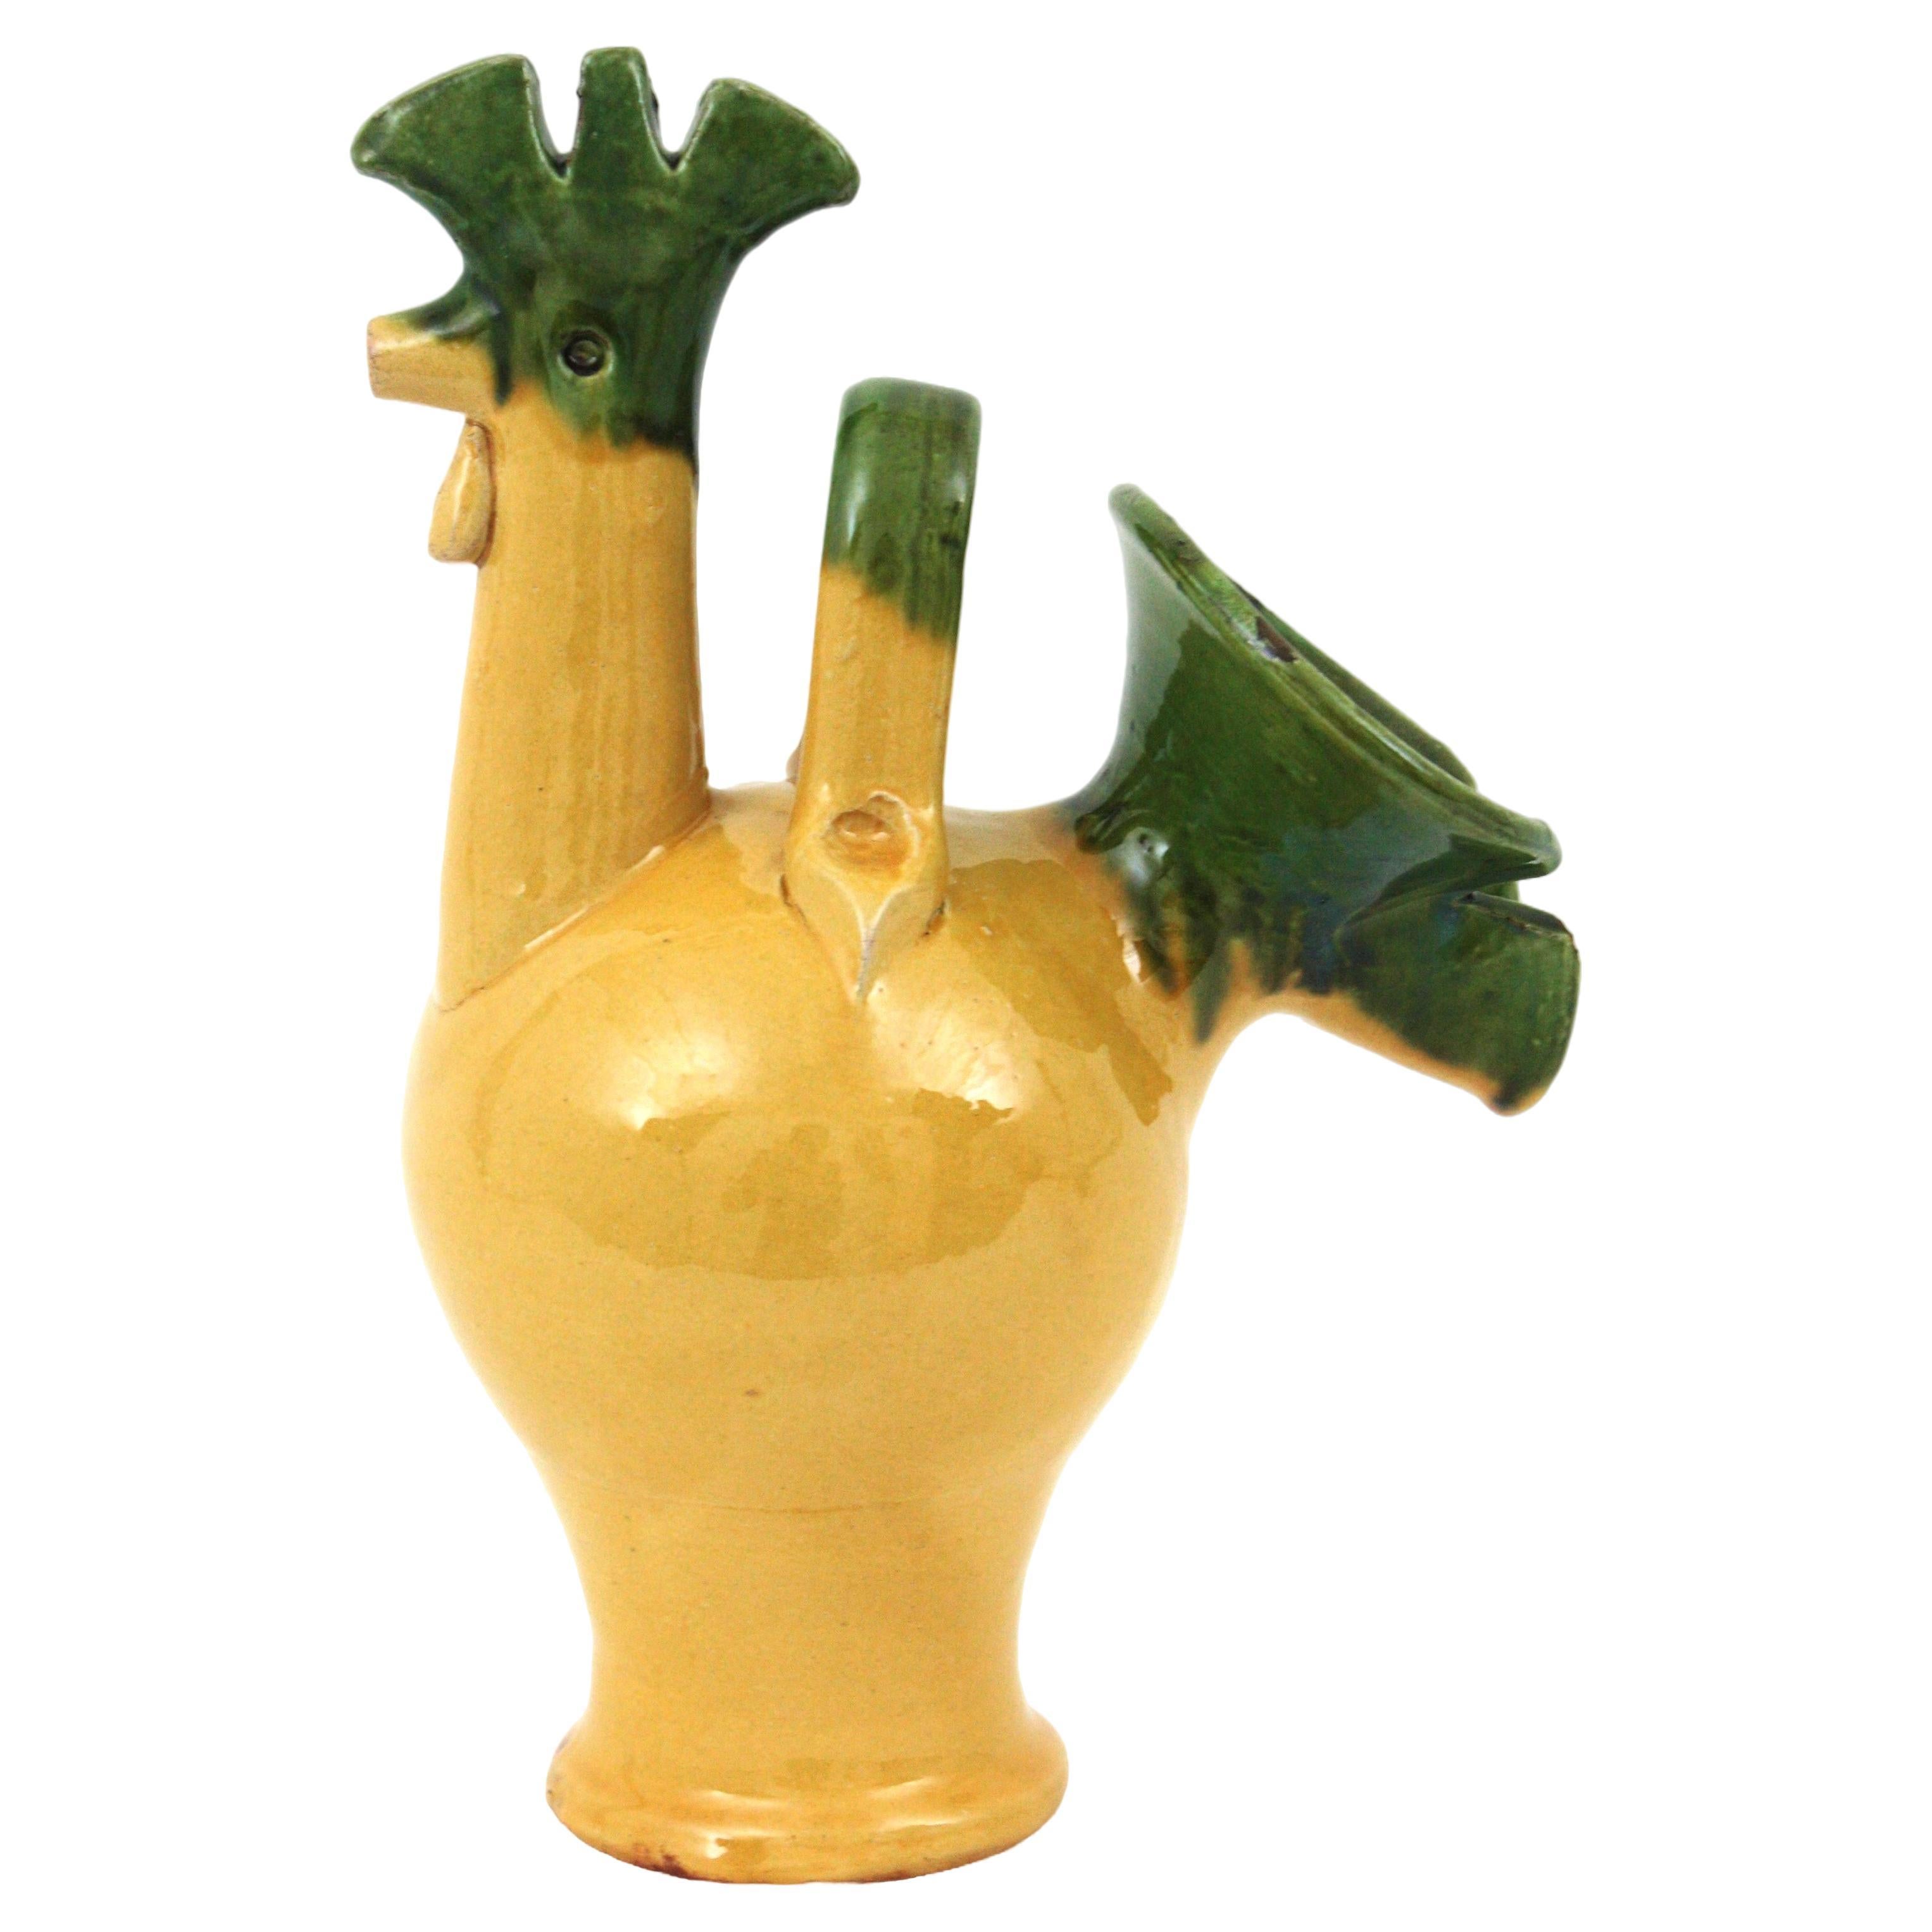 Eye-catching green and yellow Majolica ceramic rooster jug / pitcher, France, 1950s.
Handcrafted in yellow glazed ceramic with green accents.
A cool accent to any kitchen or to be user as serving pitcher. Lovely as a part of a ceramics collection